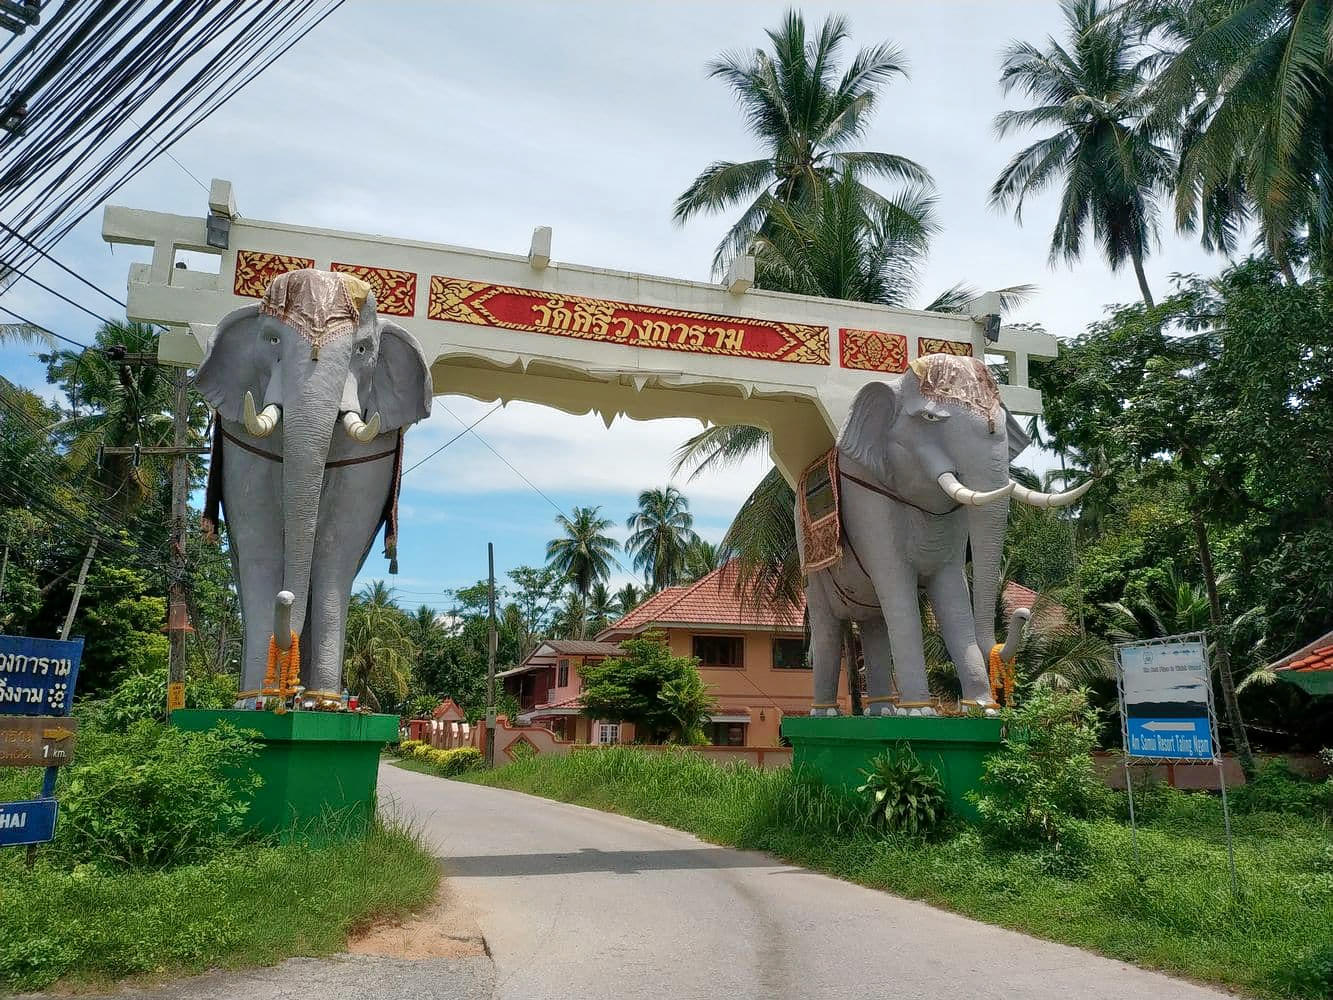 Elephant Gate Overview